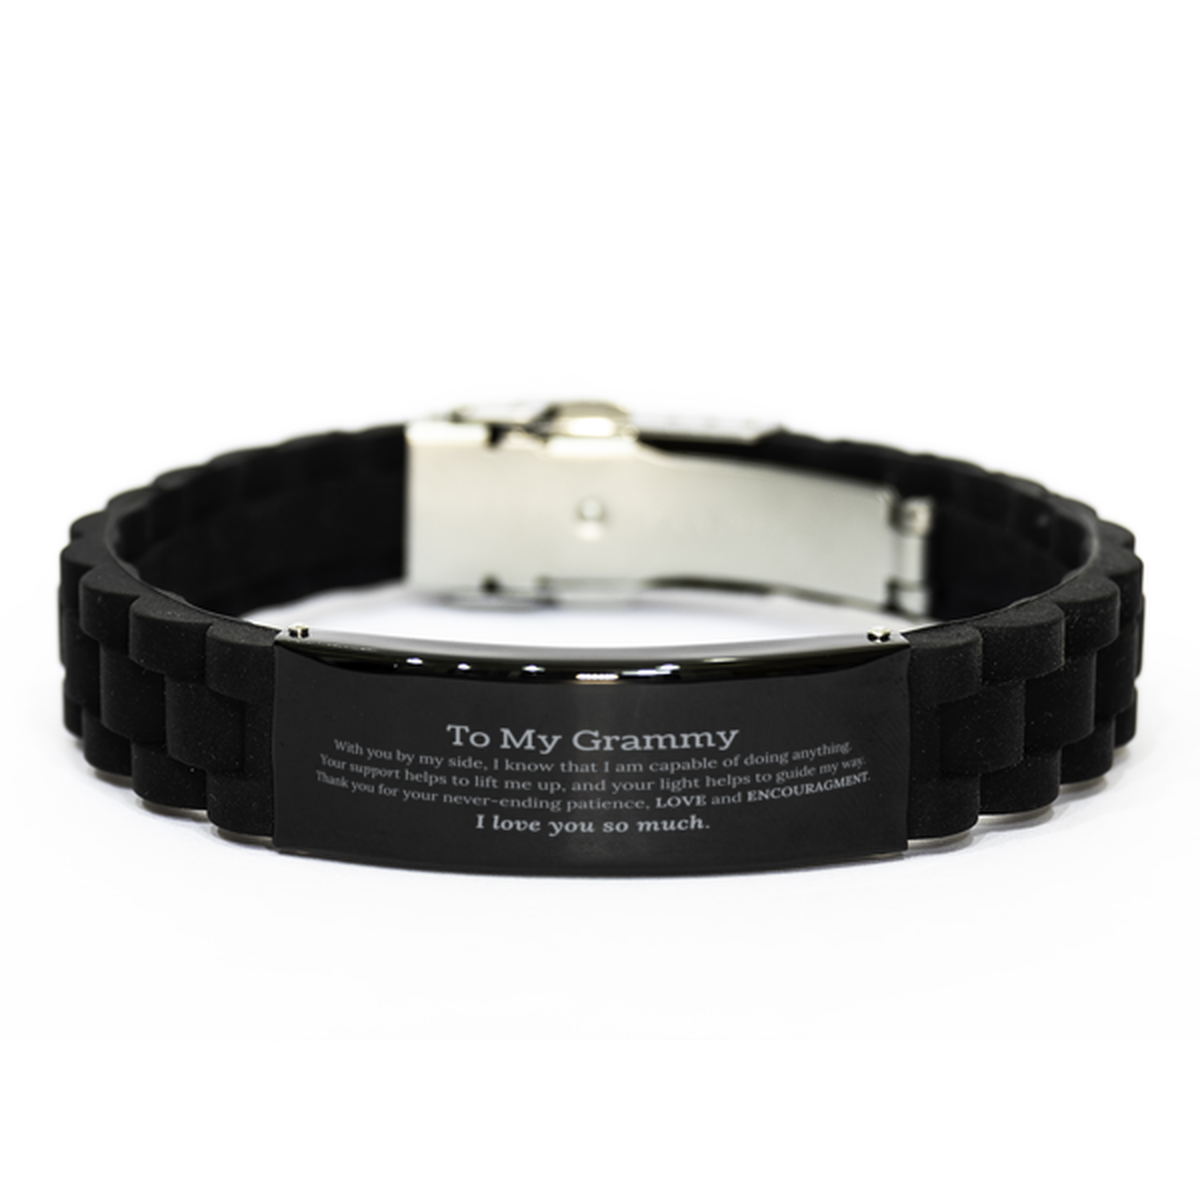 Appreciation Grammy Black Glidelock Clasp Bracelet Gifts, To My Grammy Birthday Christmas Wedding Keepsake Gifts for Grammy With you by my side, I know that I am capable of doing anything. I love you so much